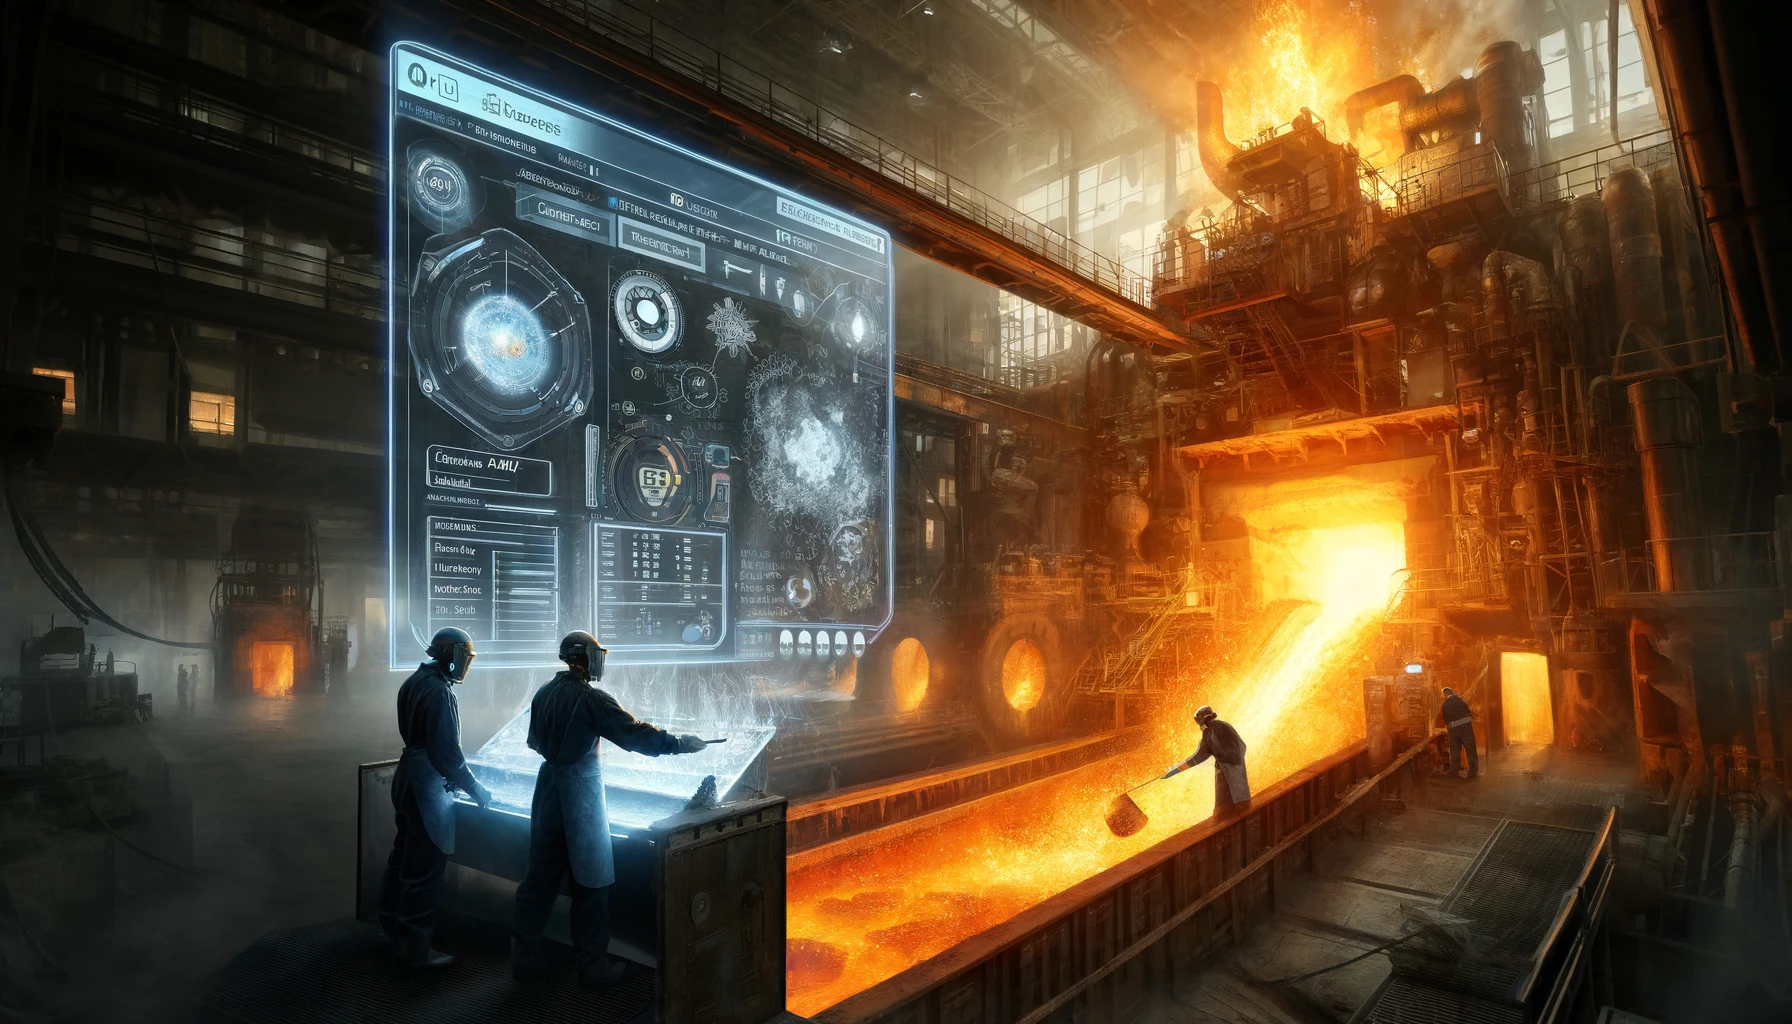 This illustration accurately features human workers in a traditional foundry setting, using advanced AI technology to control the metallurgical processes. The interface displays technical data relevant to the industry, ensuring a focused and accurate representation.